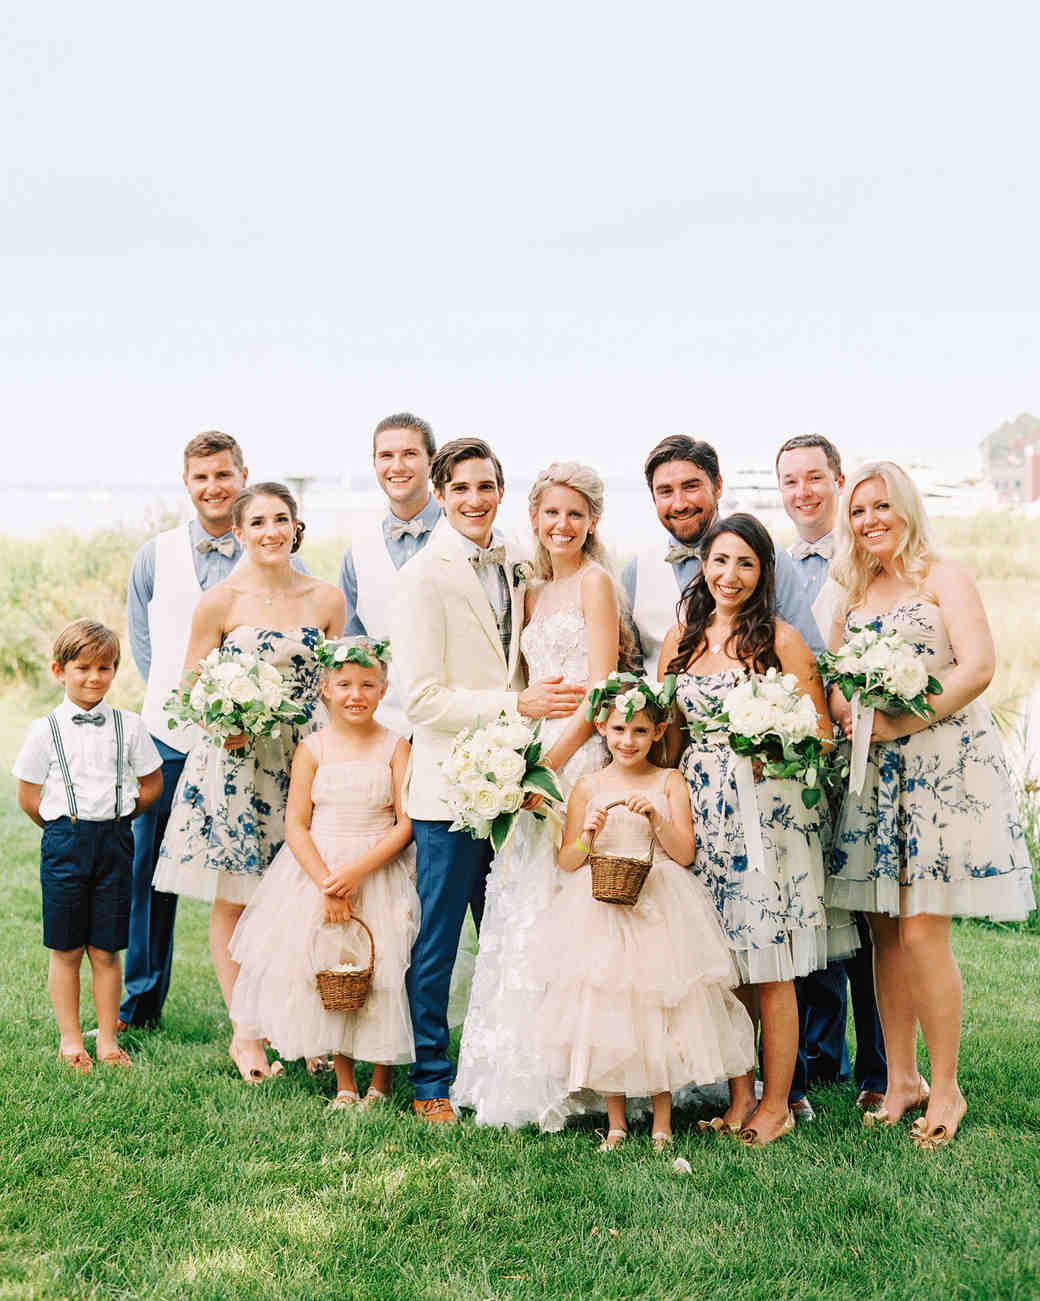 Engagement Party Ideas For Women
 The Best Dressed Flower Girls from Real Weddings